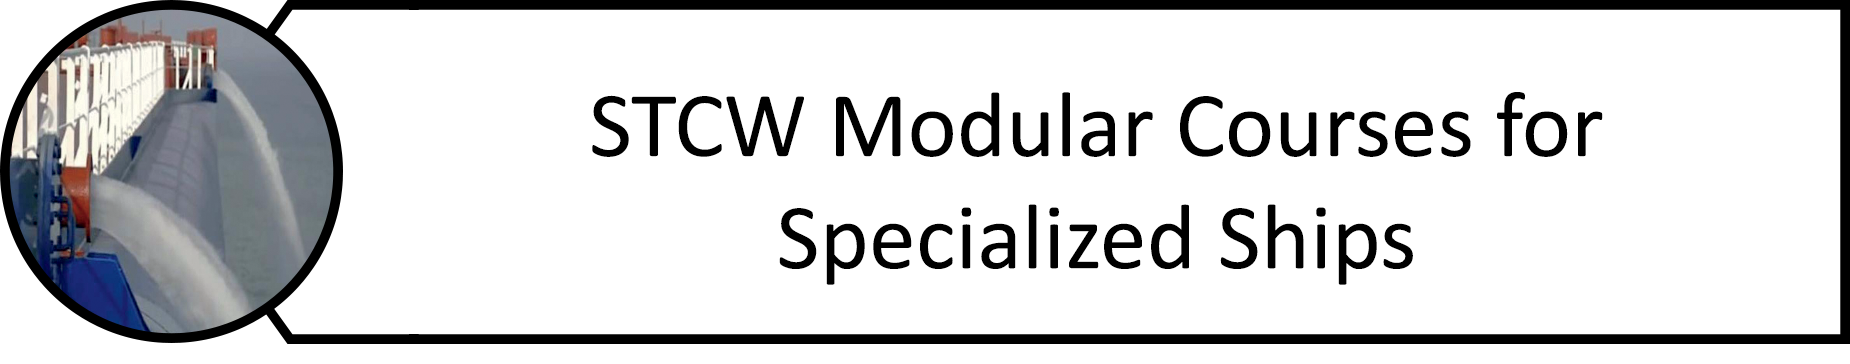 STCW Modular Courses for Specialized Ships